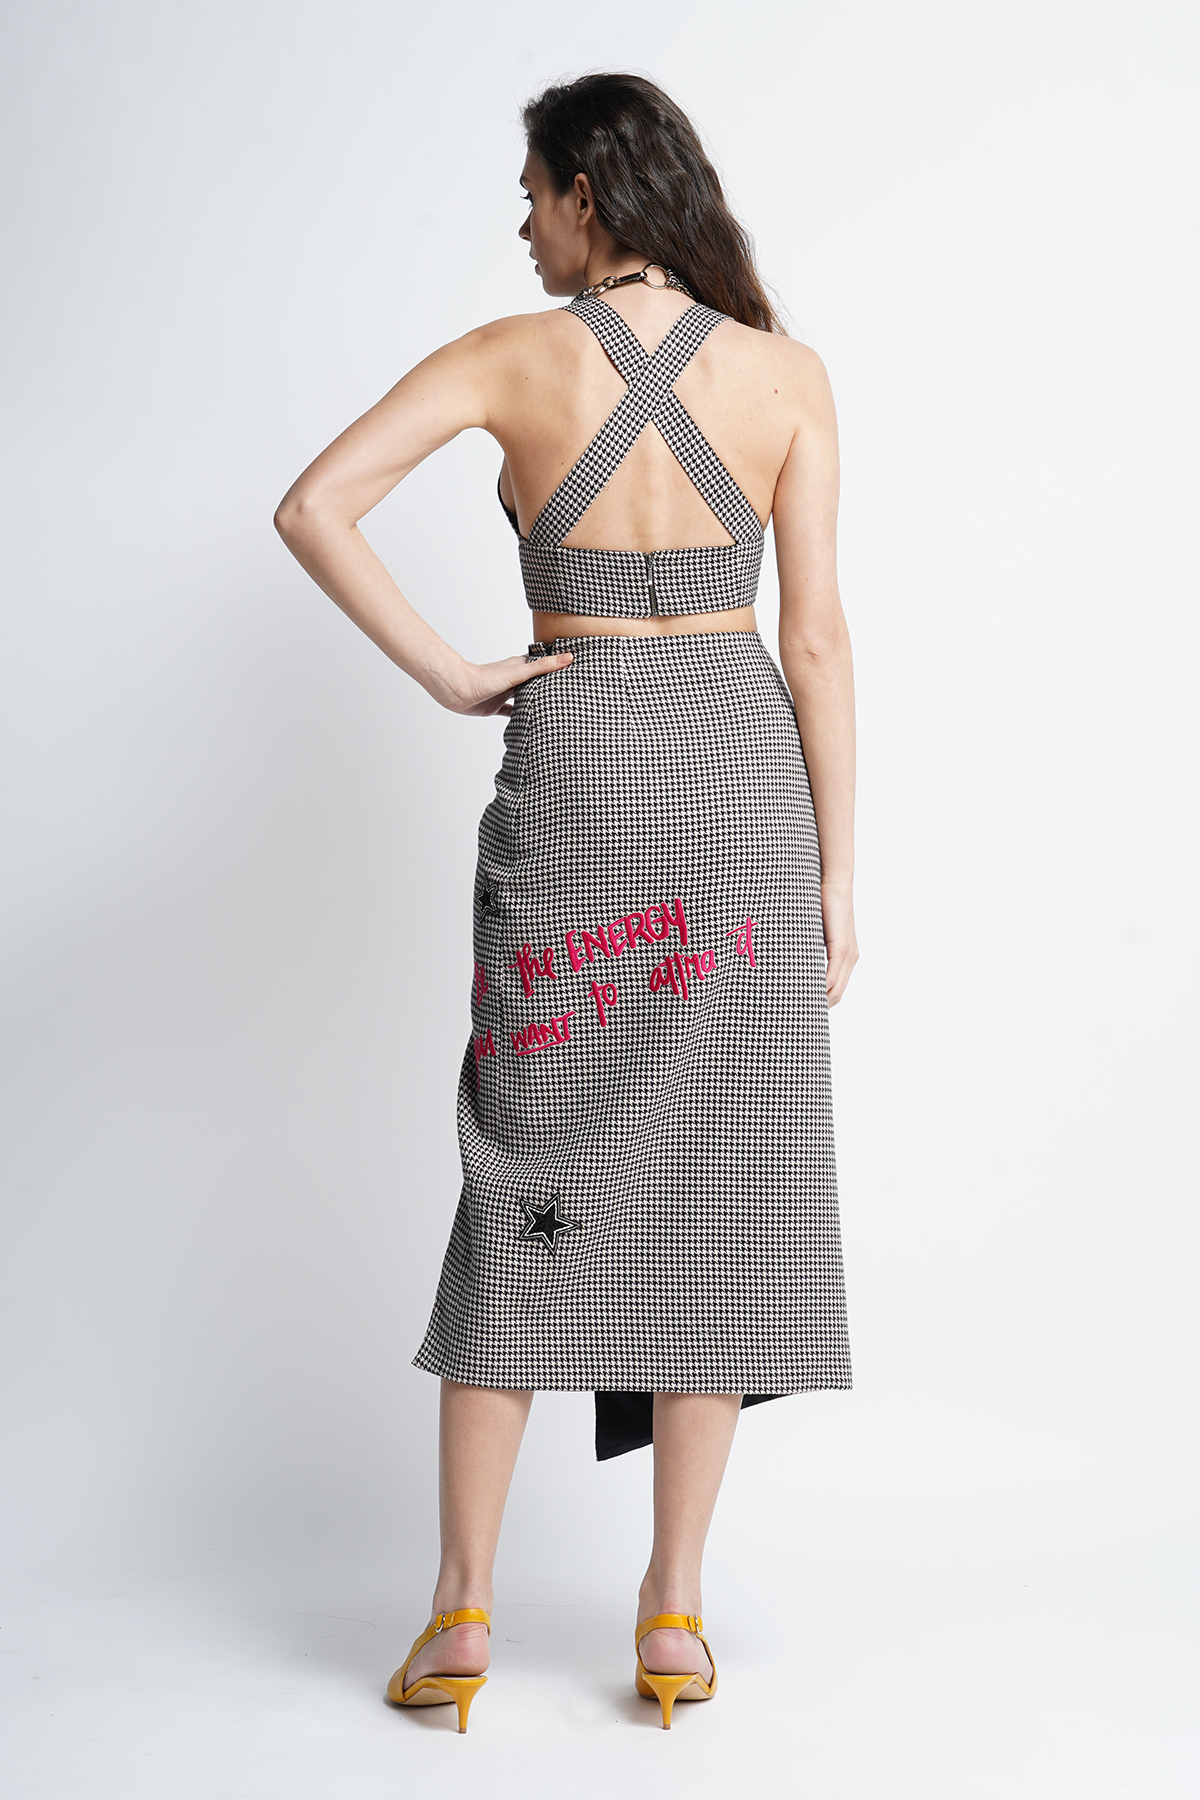 Bralette Top of Numbers Text and Dragonfly Wrap Skirt